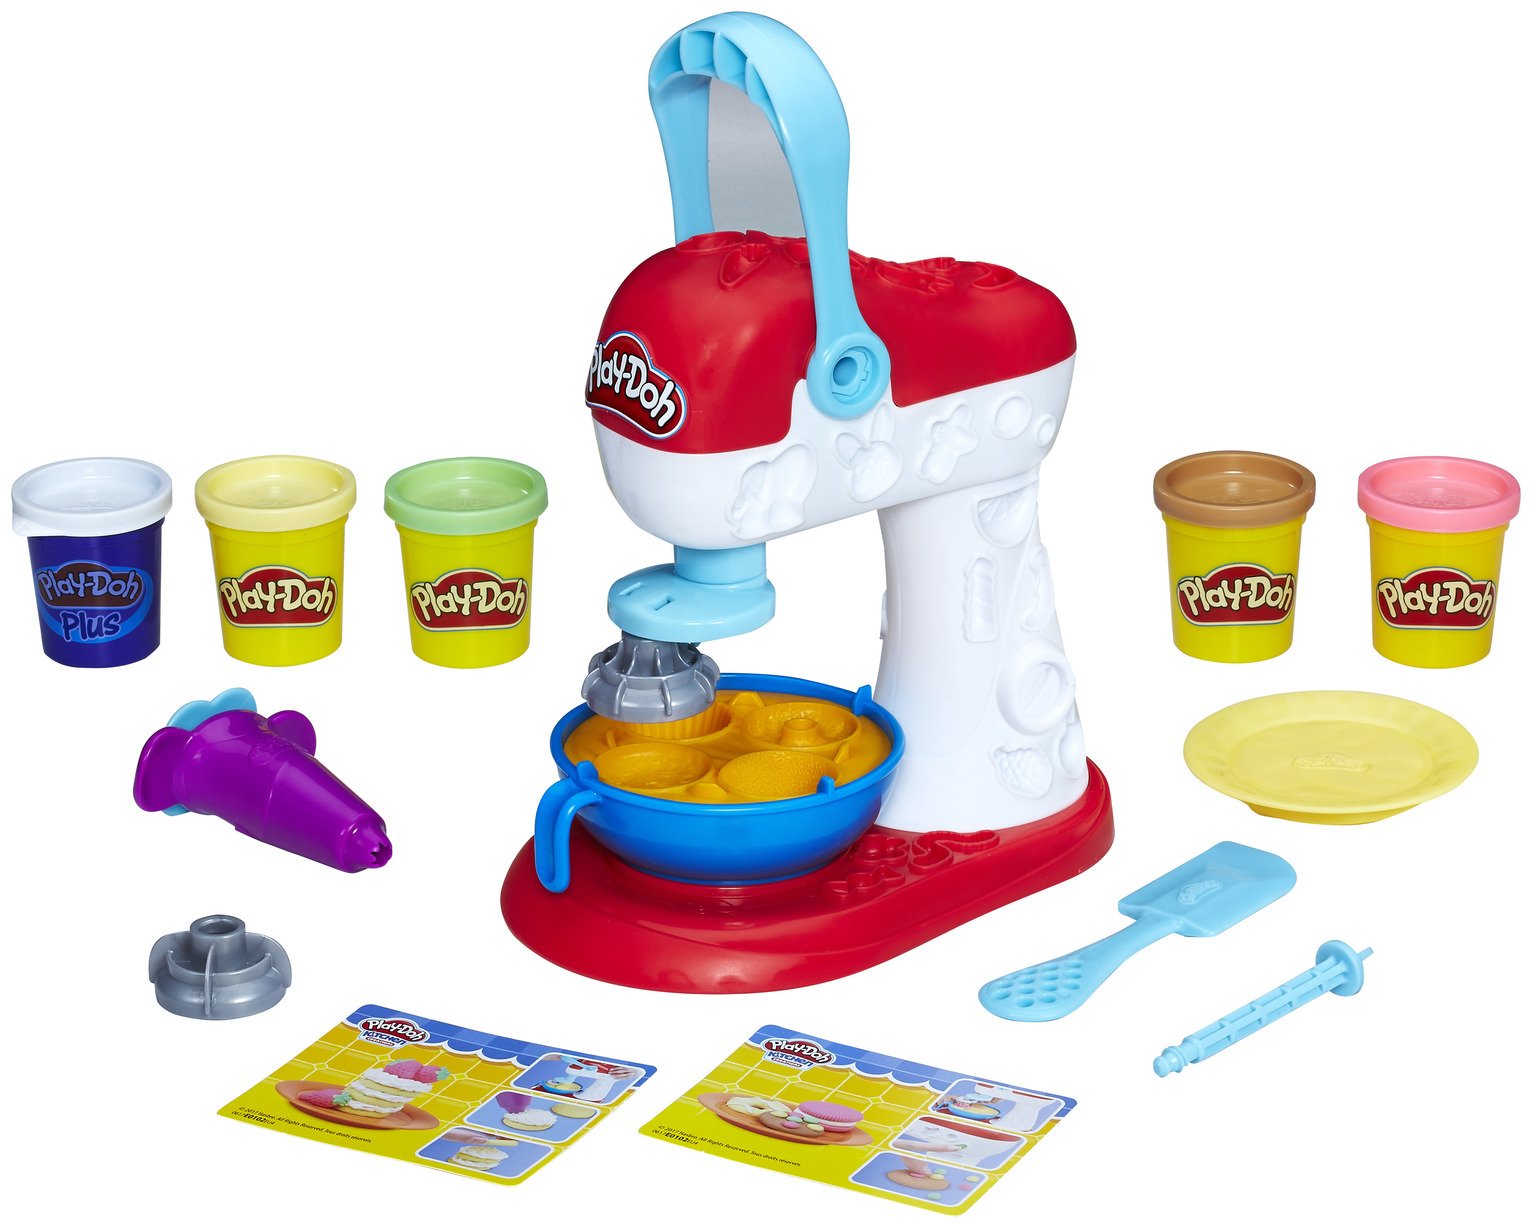 Play-Doh Kitchen Creations Spinning Treats Mixer Review